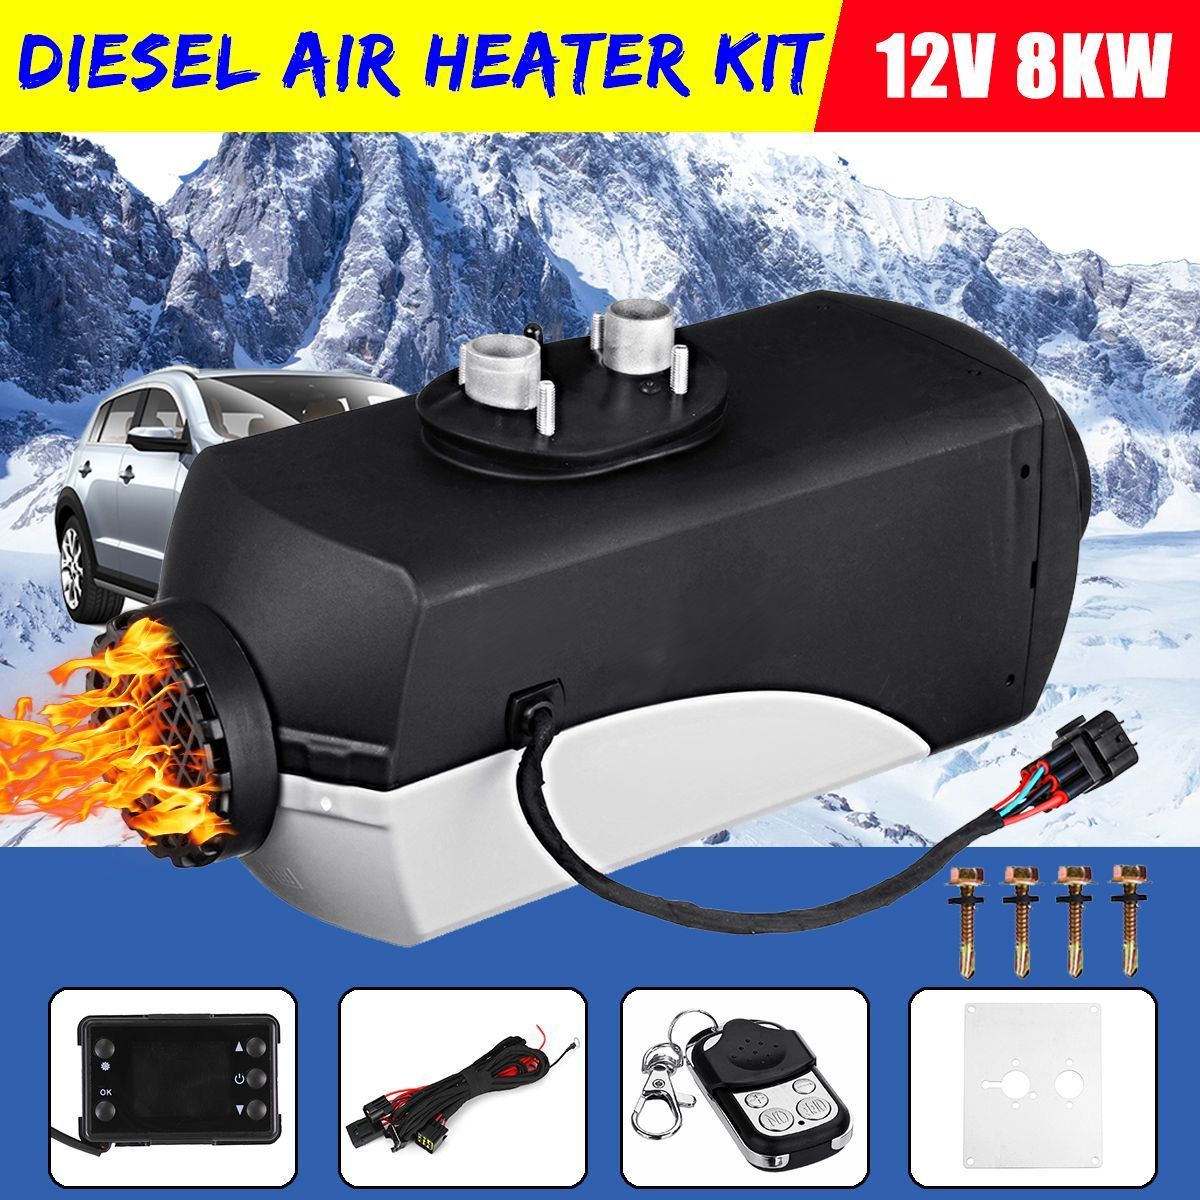 8KW-12V-Diesel-Air-Heater-Car-Heater-Parking-Heater-With-Remote-Control-LCD-Monitor-for-RV-Motorhome-1544736